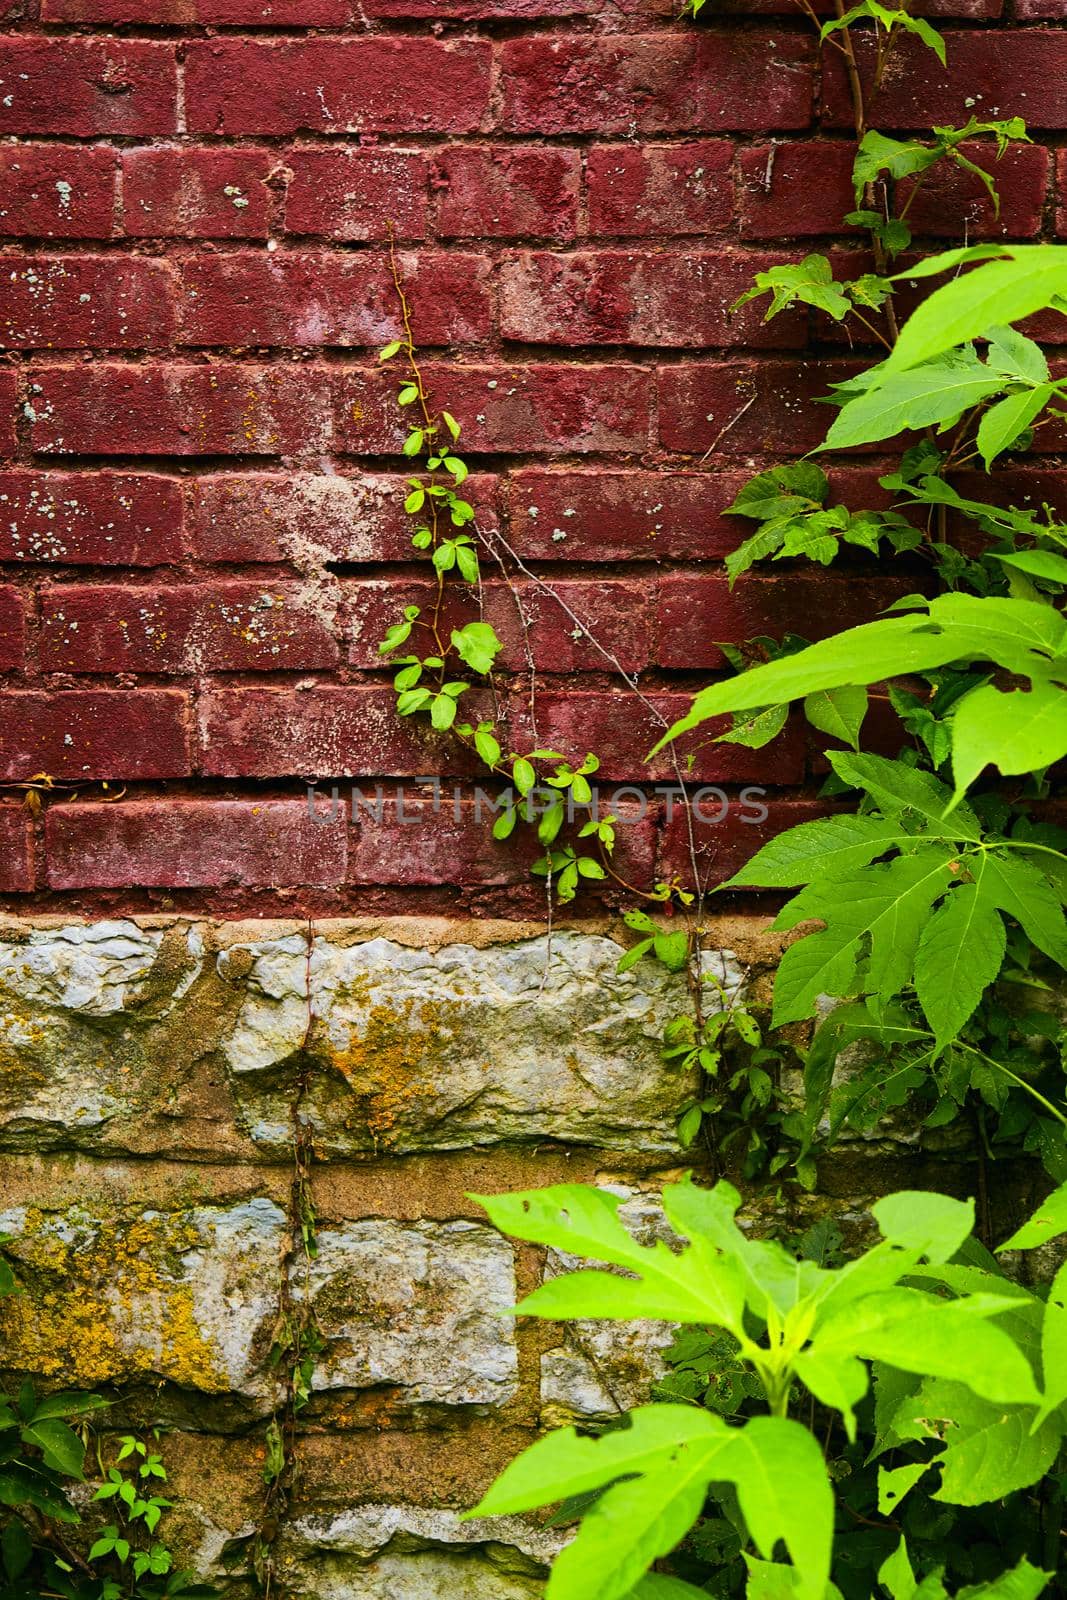 Image of Red brick and gray stone wall with young vine growing